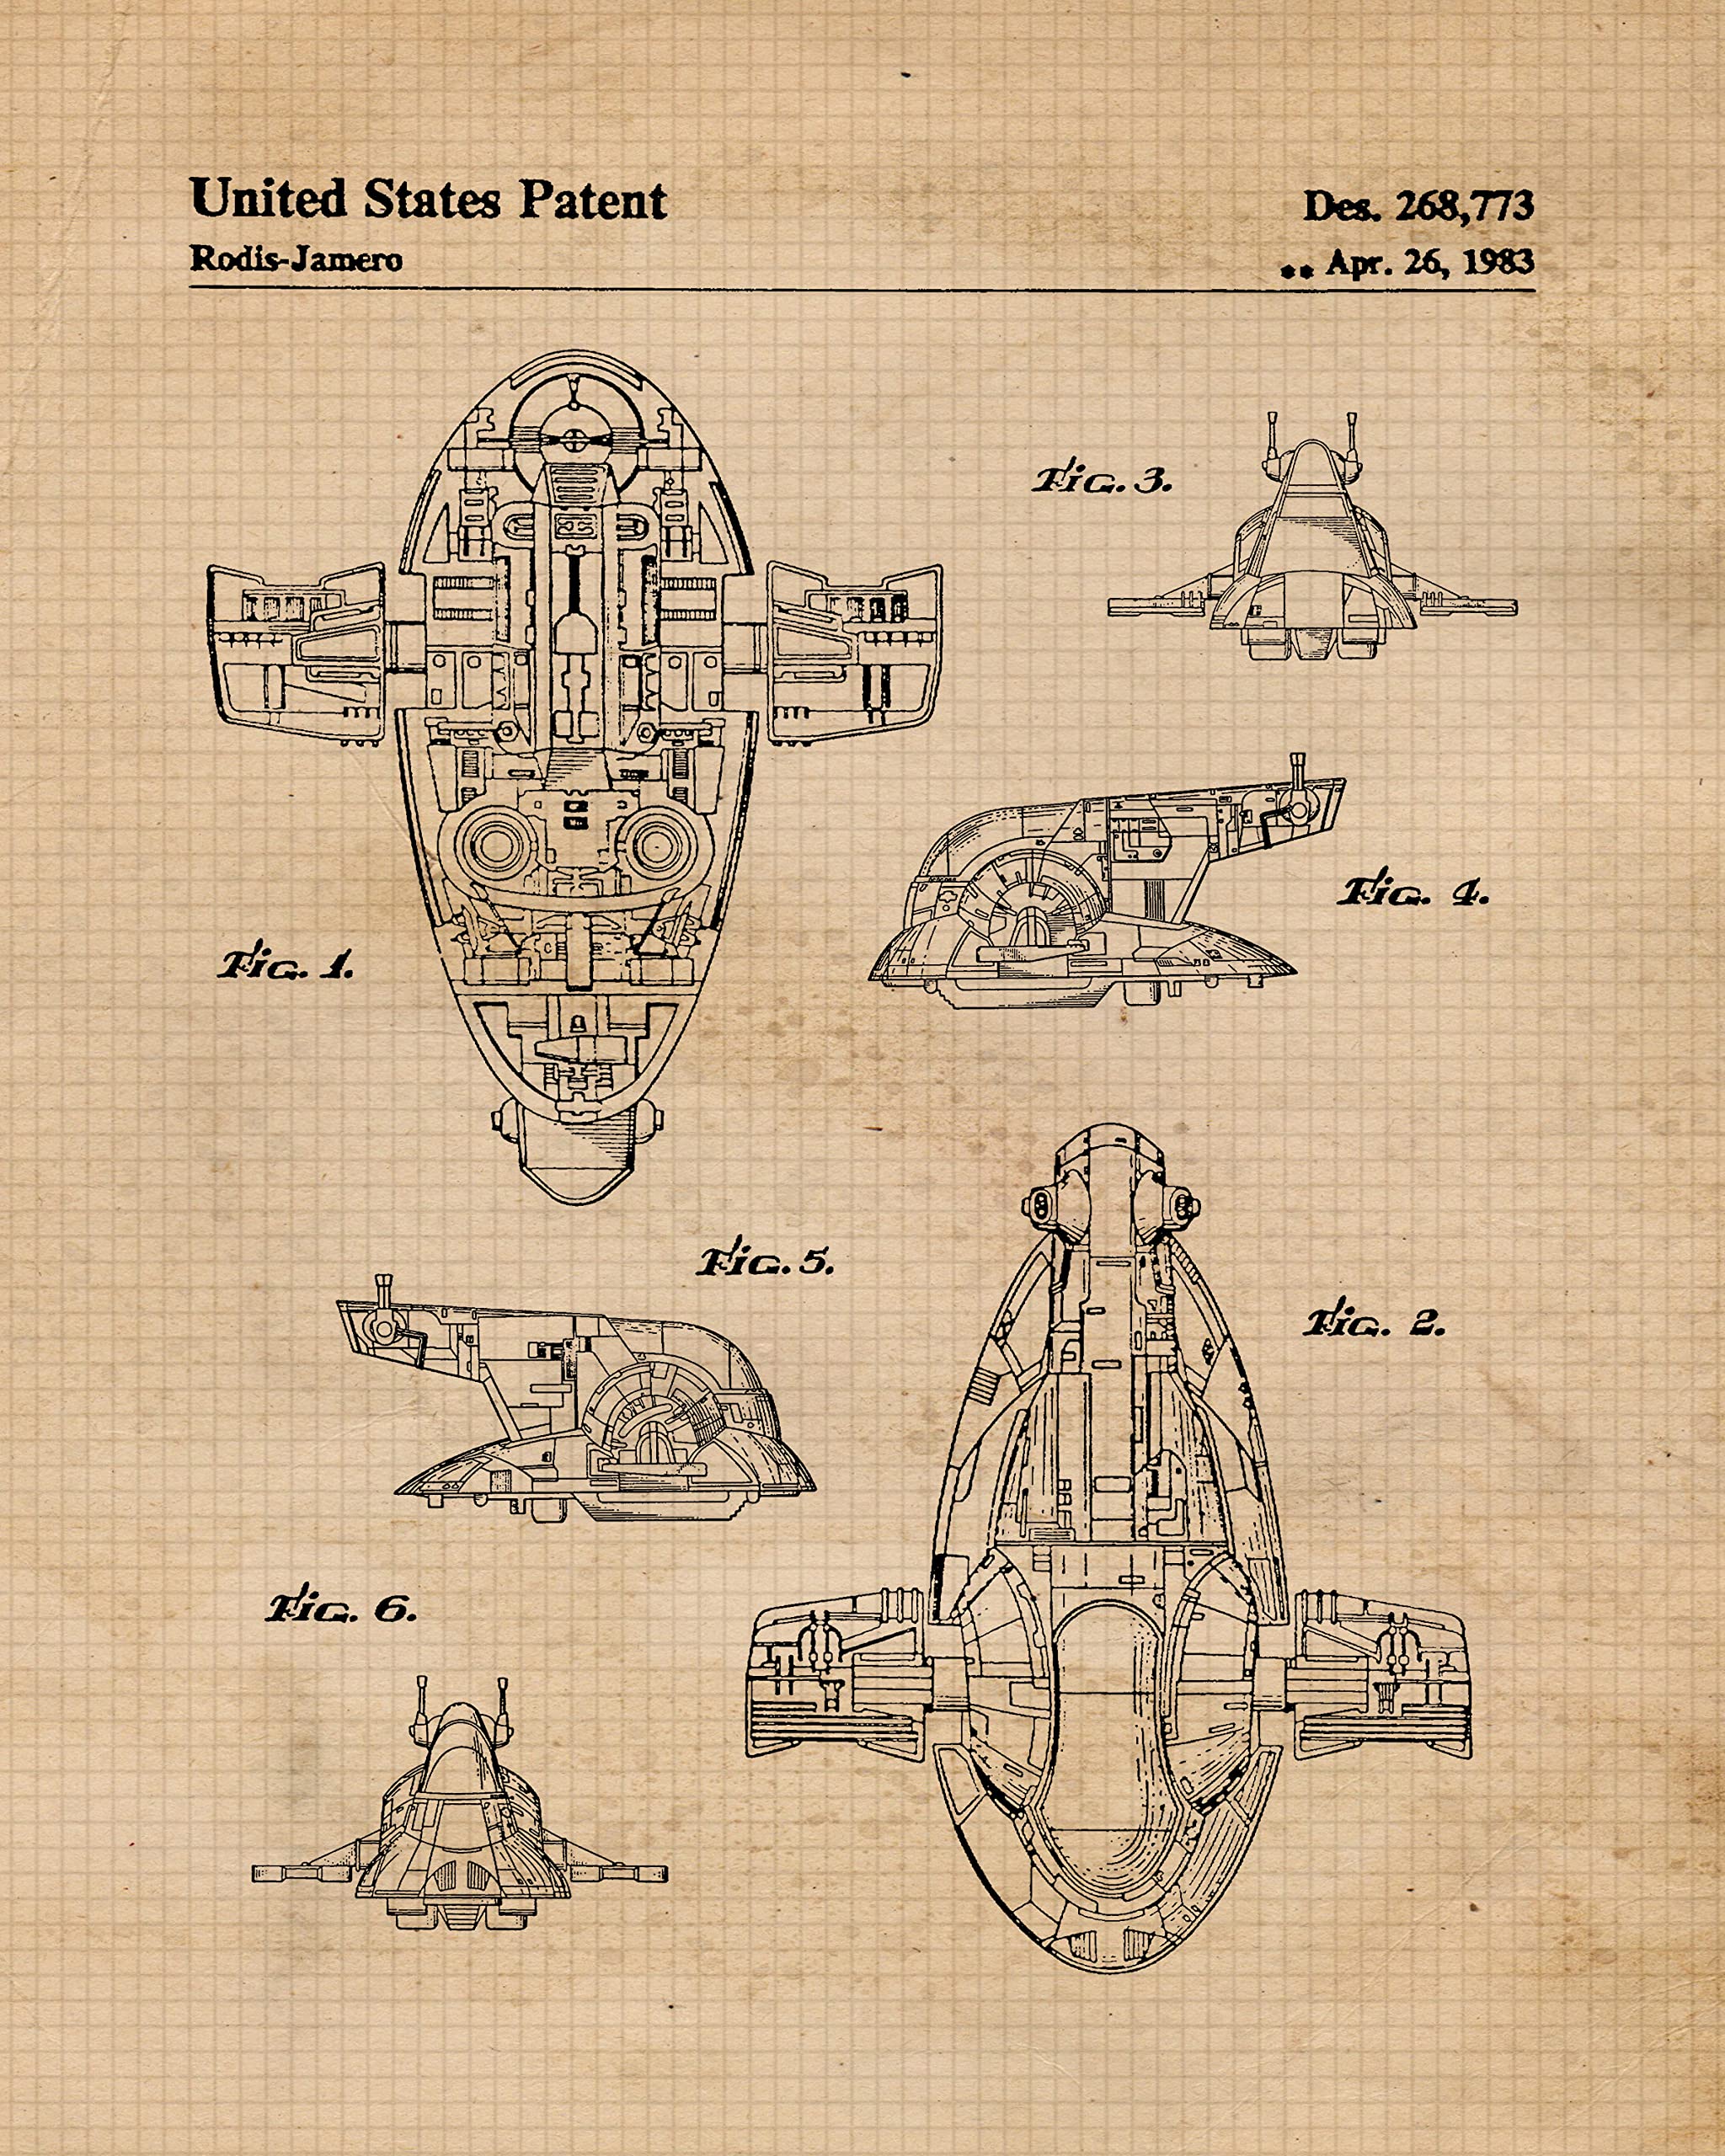 Vintage Slave 1 Space Vessel Patent Prints, 1 (11x14) Unframed Photos, Wall Art Decor Gifts for Home Star Sci-Fi Wars Office Gears Garage Game Comic-Con Studio Shop Engineer Student Teacher Coach Fans